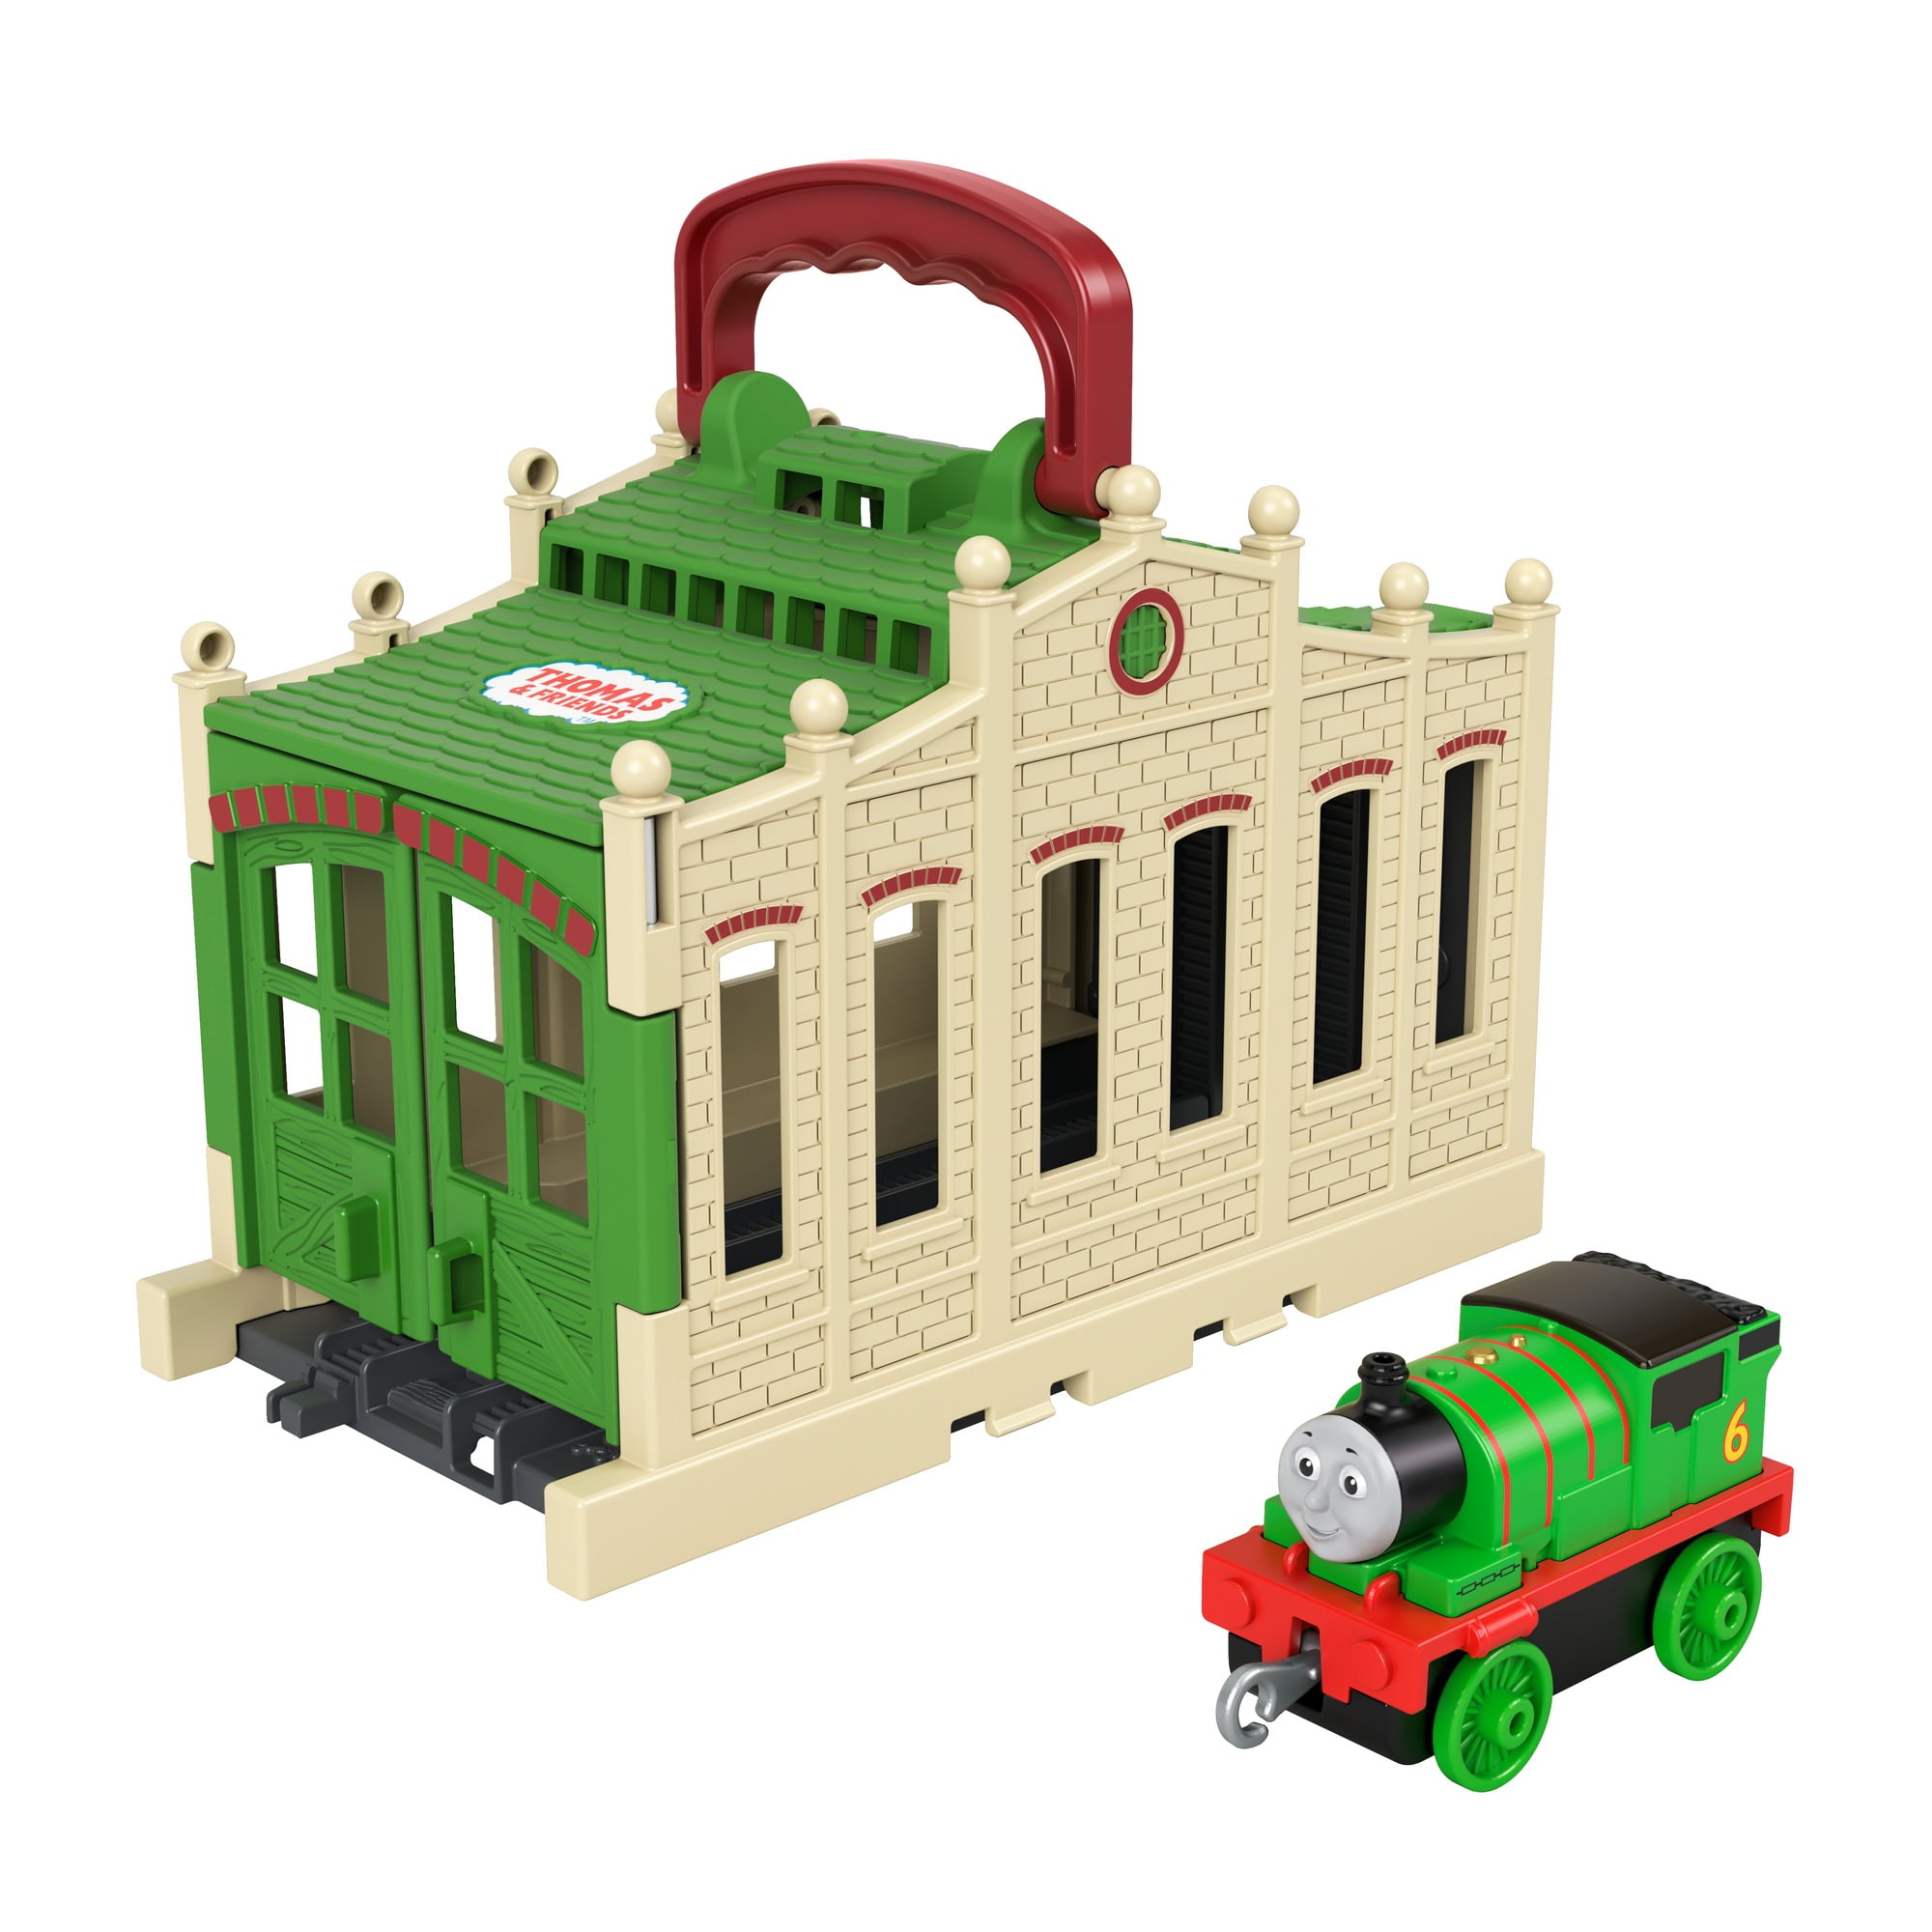 Details about   Super Cruiser Thomas and Friends Transforming Train Track 2-in-1 Kids Play Set 